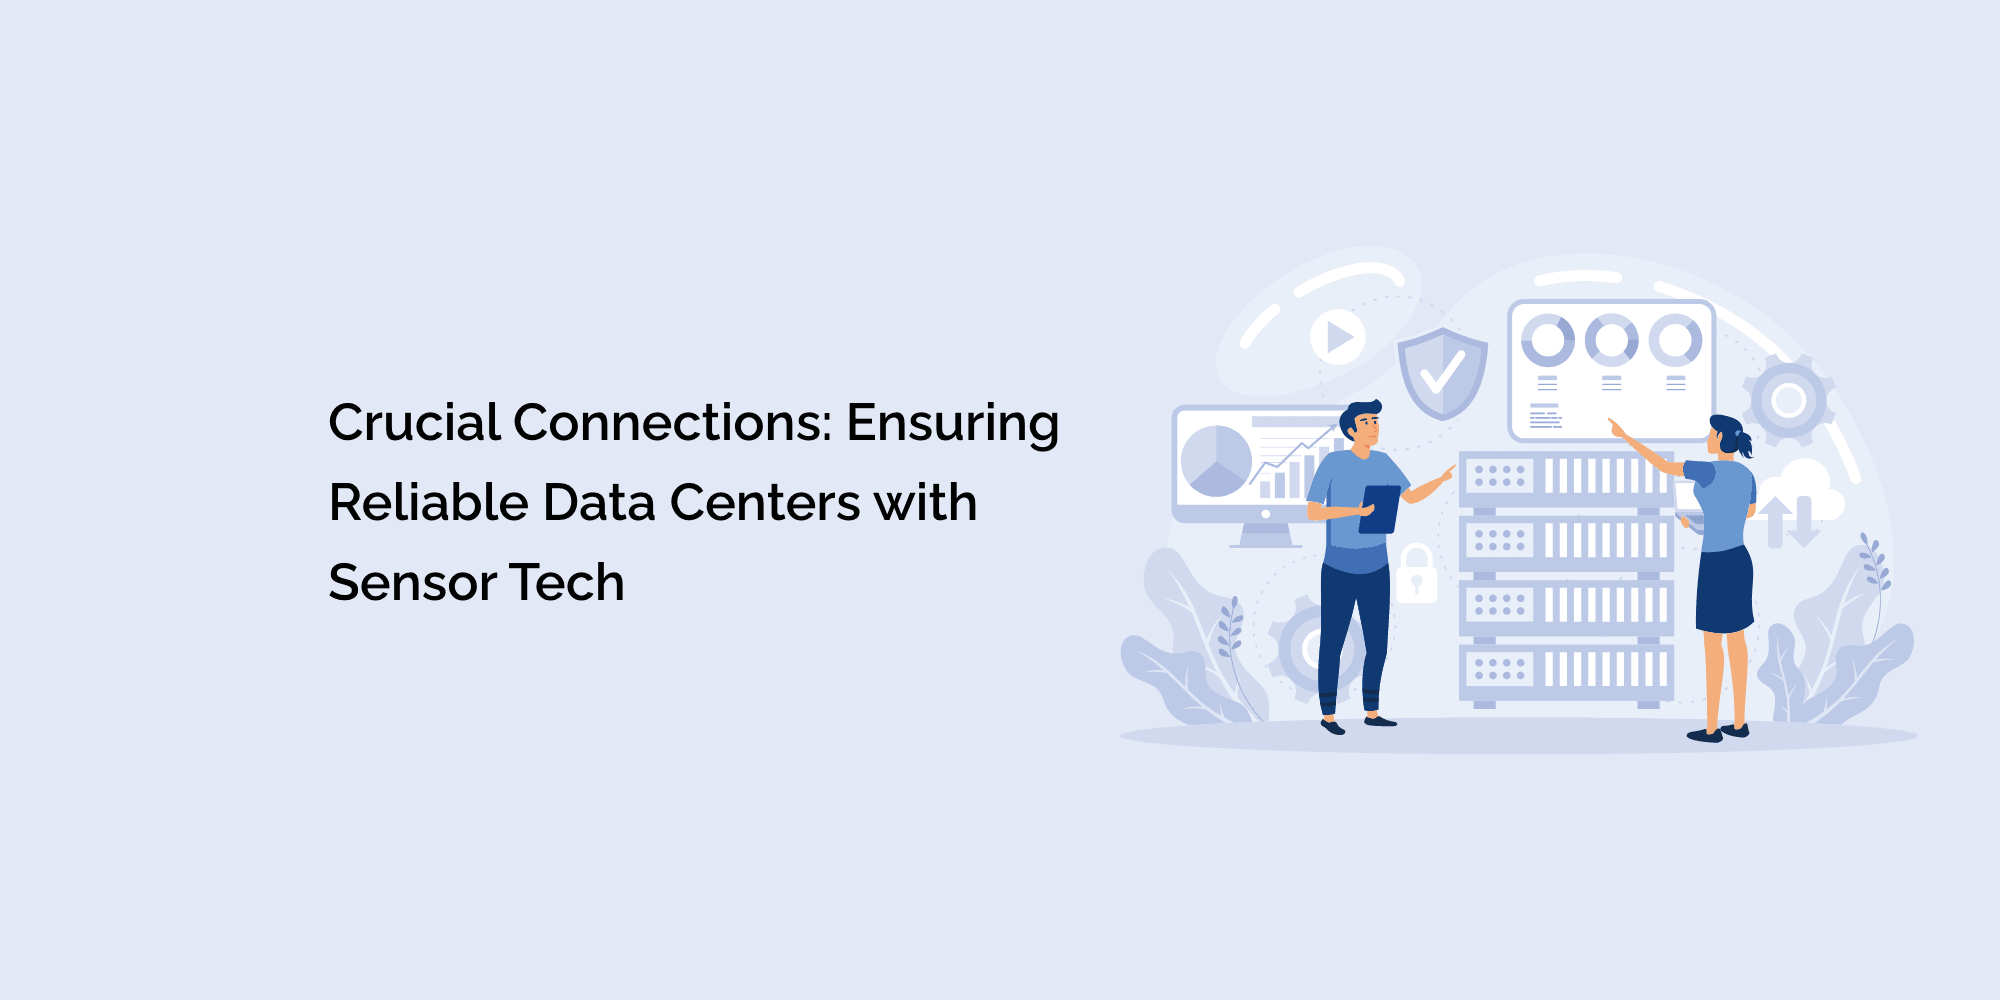 Crucial Connections: Ensuring Reliable Data Centers with Sensor Tech